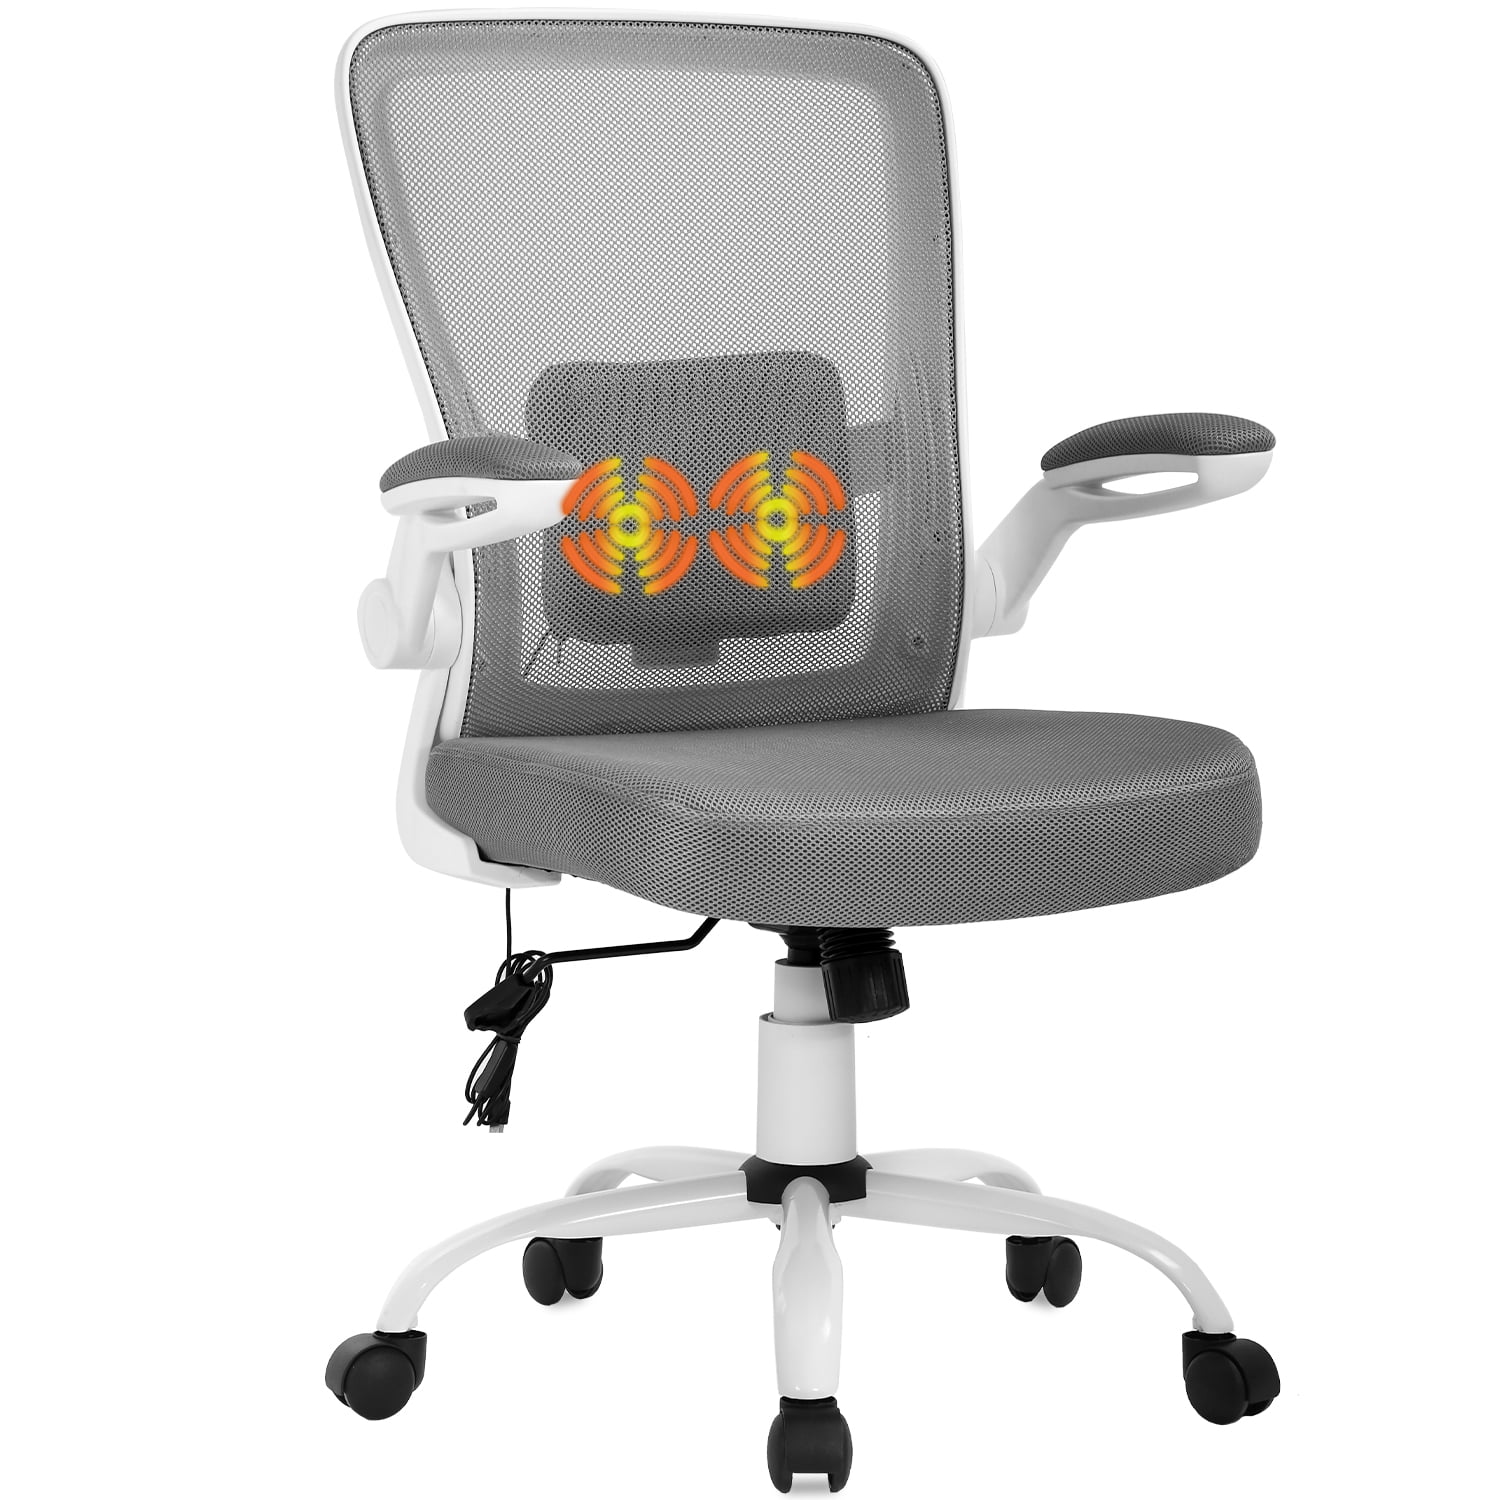 Details about   Ergonomic Mesh Office Chair Height Adjustable Swivel Chair Heavy Duty Metal Base 